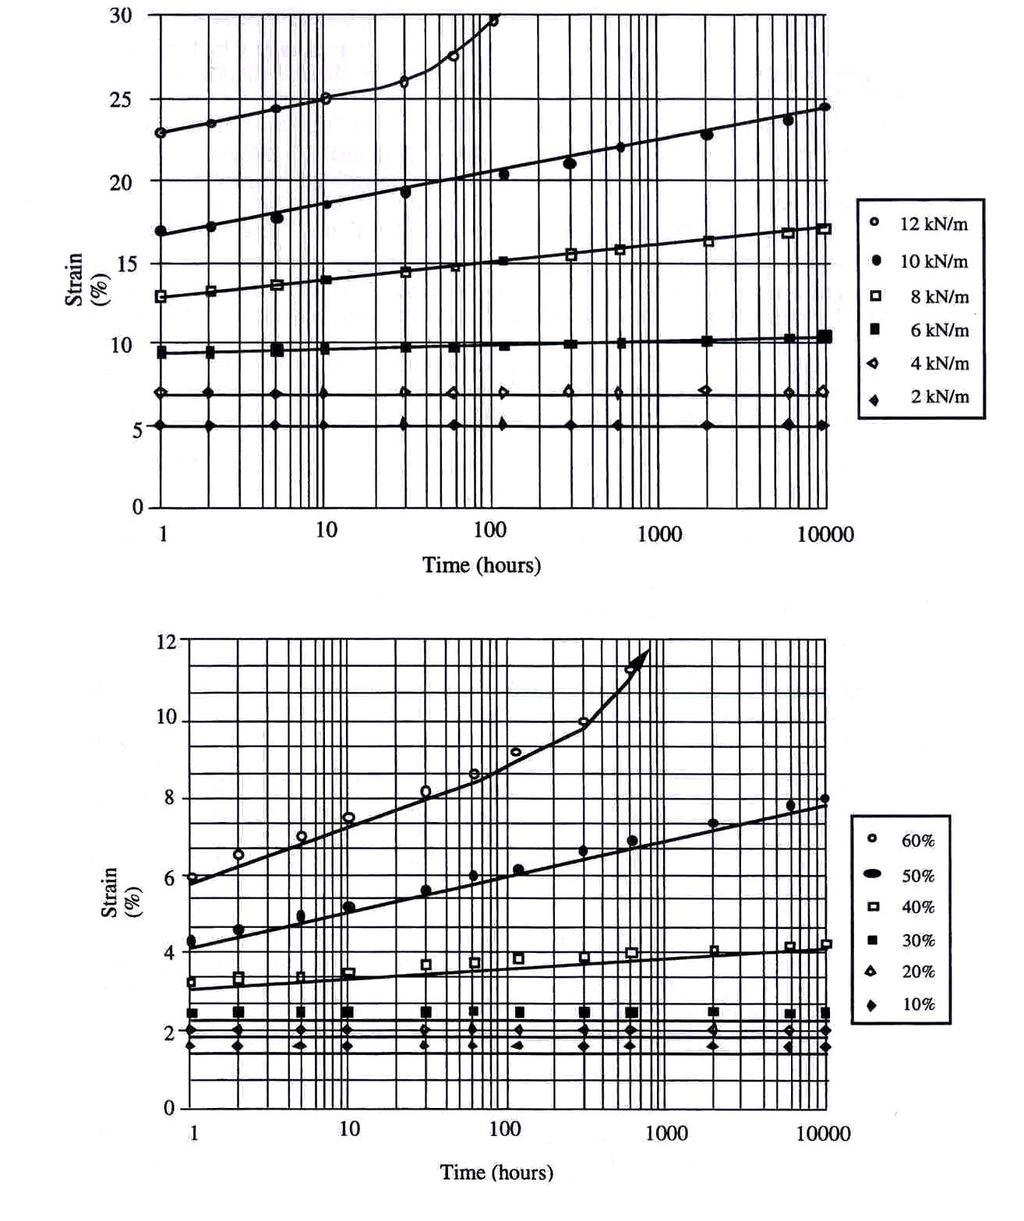 Limit Limit Fig. 1 - Typical Geogrid Curves Taken to 10,000 Hour Duration 8.2.